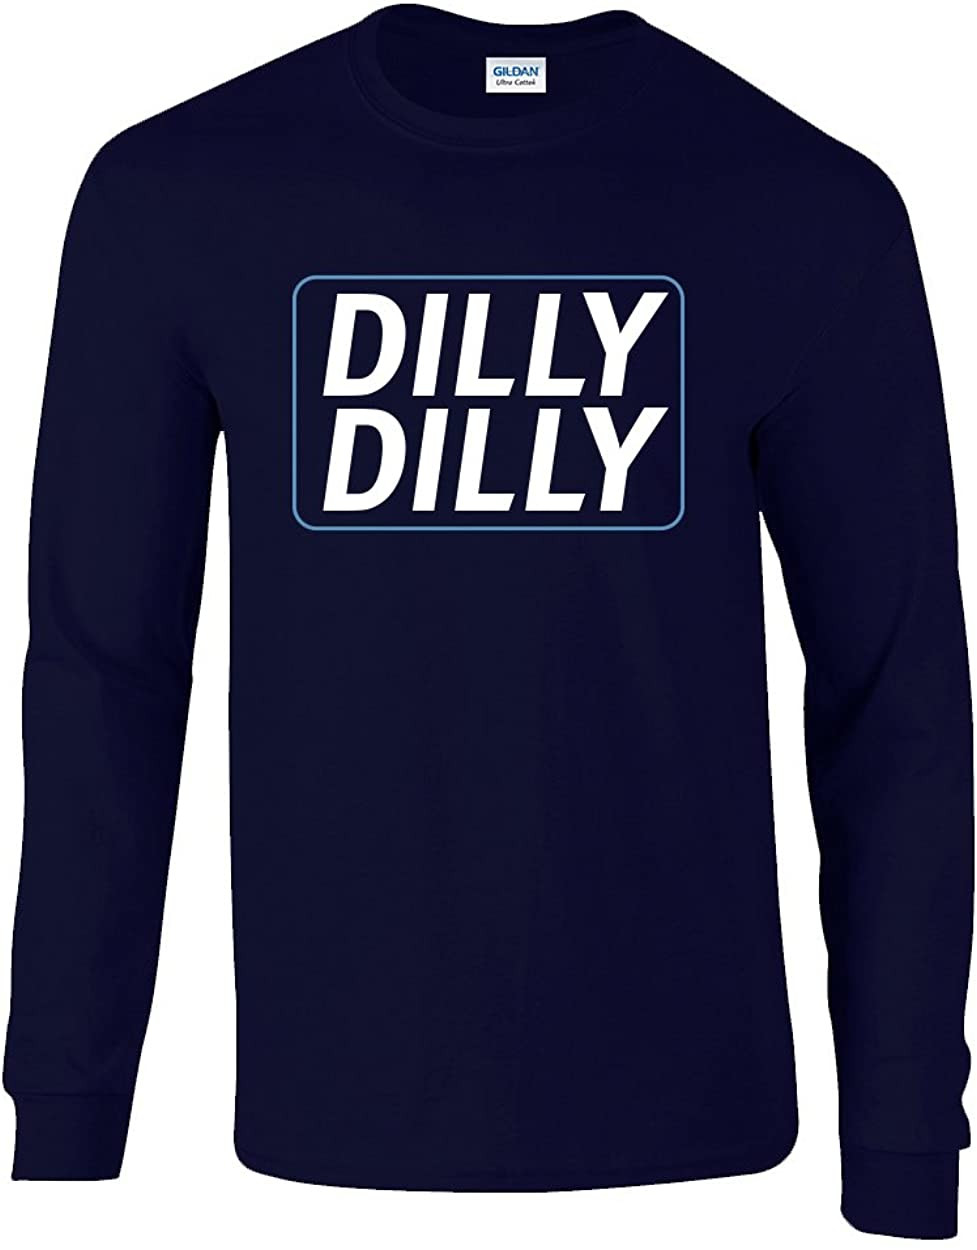 Funny Beer Drinking Dilly Dilly T-Shirt